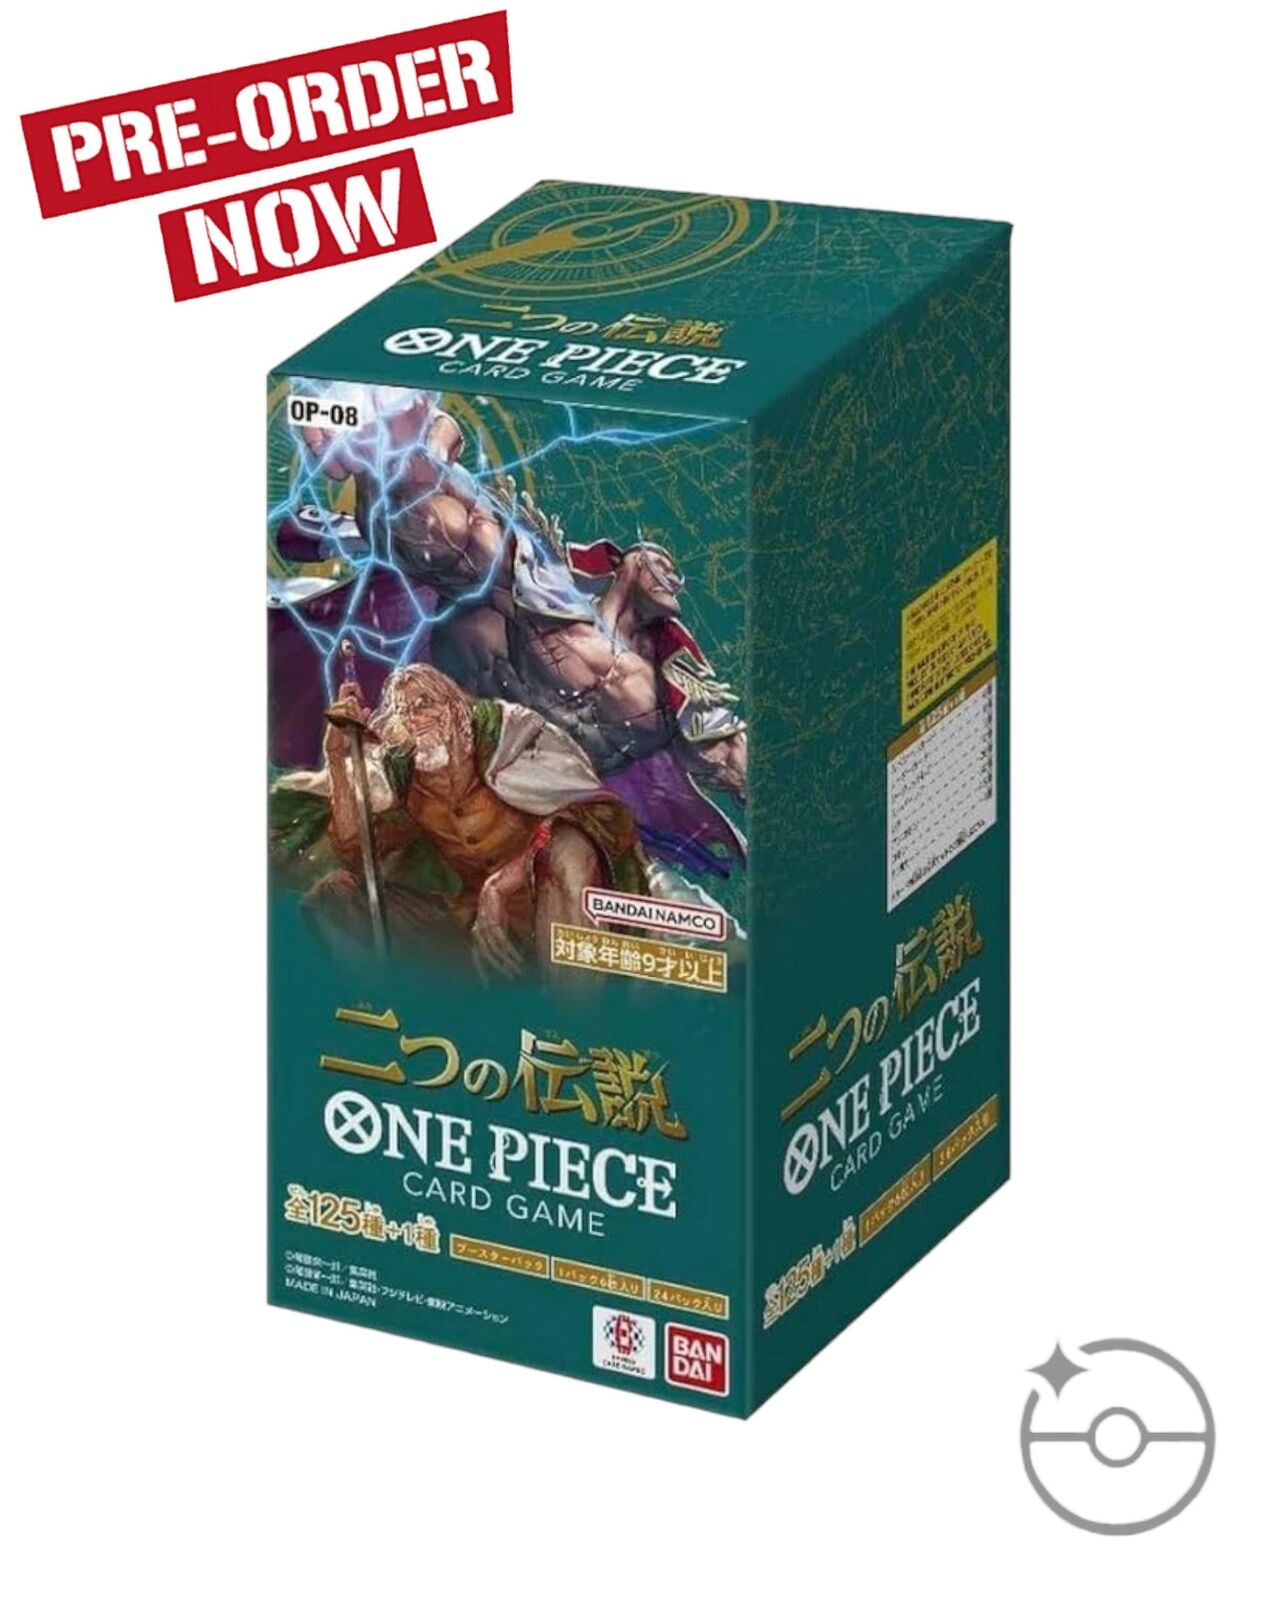 One Piece TCG Two Legends Booster Box OP-08 (Japanese) PRE-ORDER May 29th